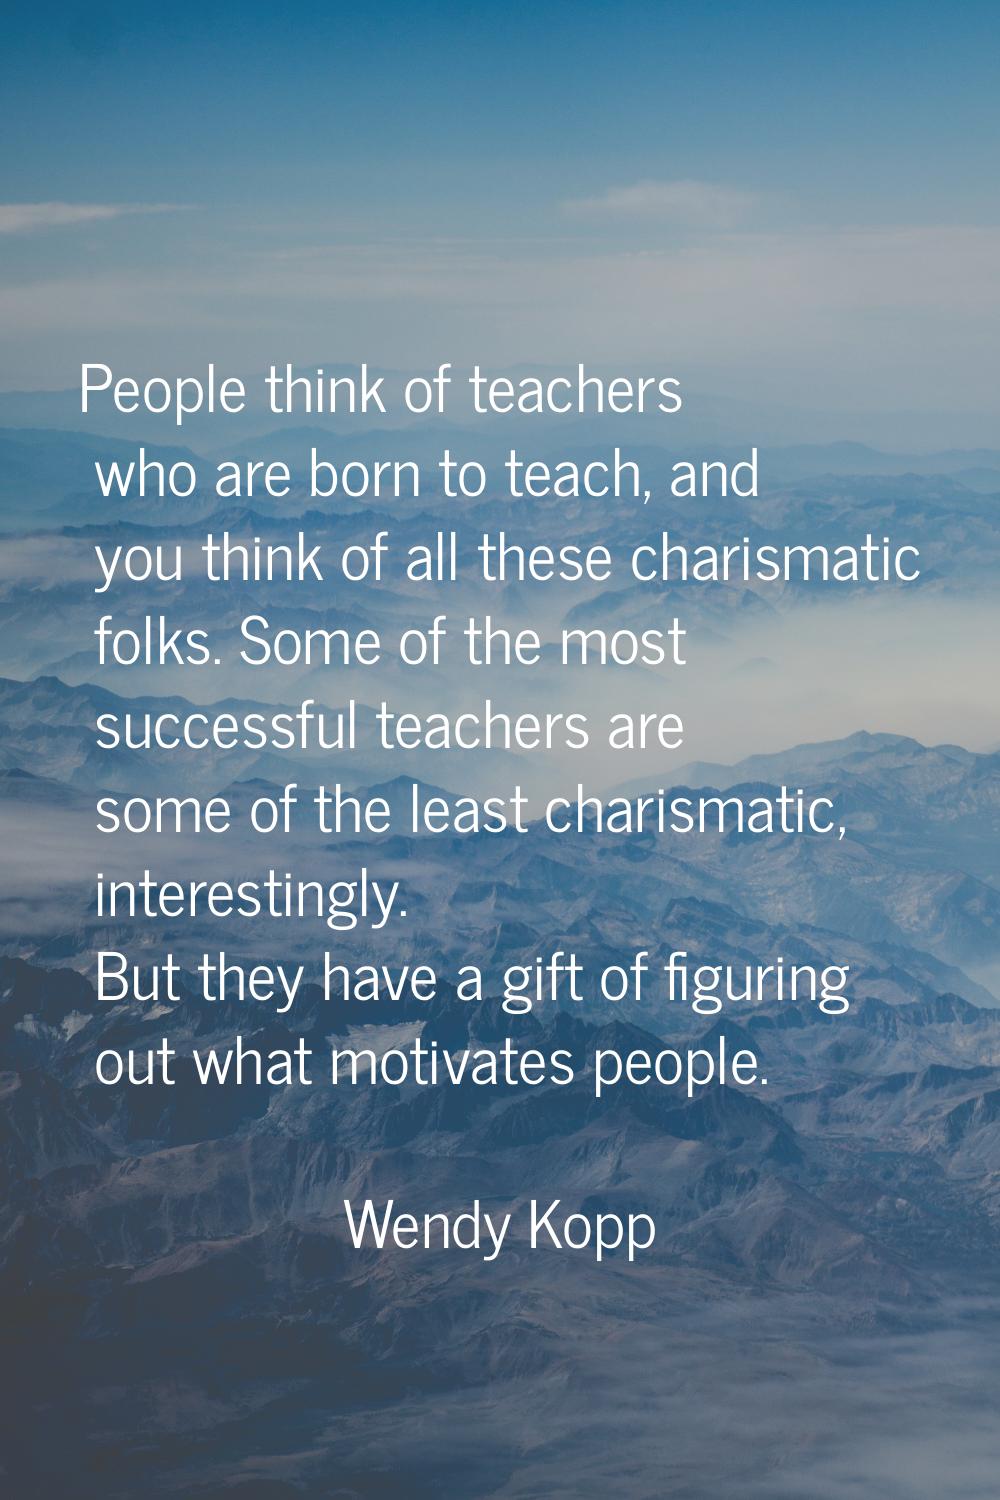 People think of teachers who are born to teach, and you think of all these charismatic folks. Some 